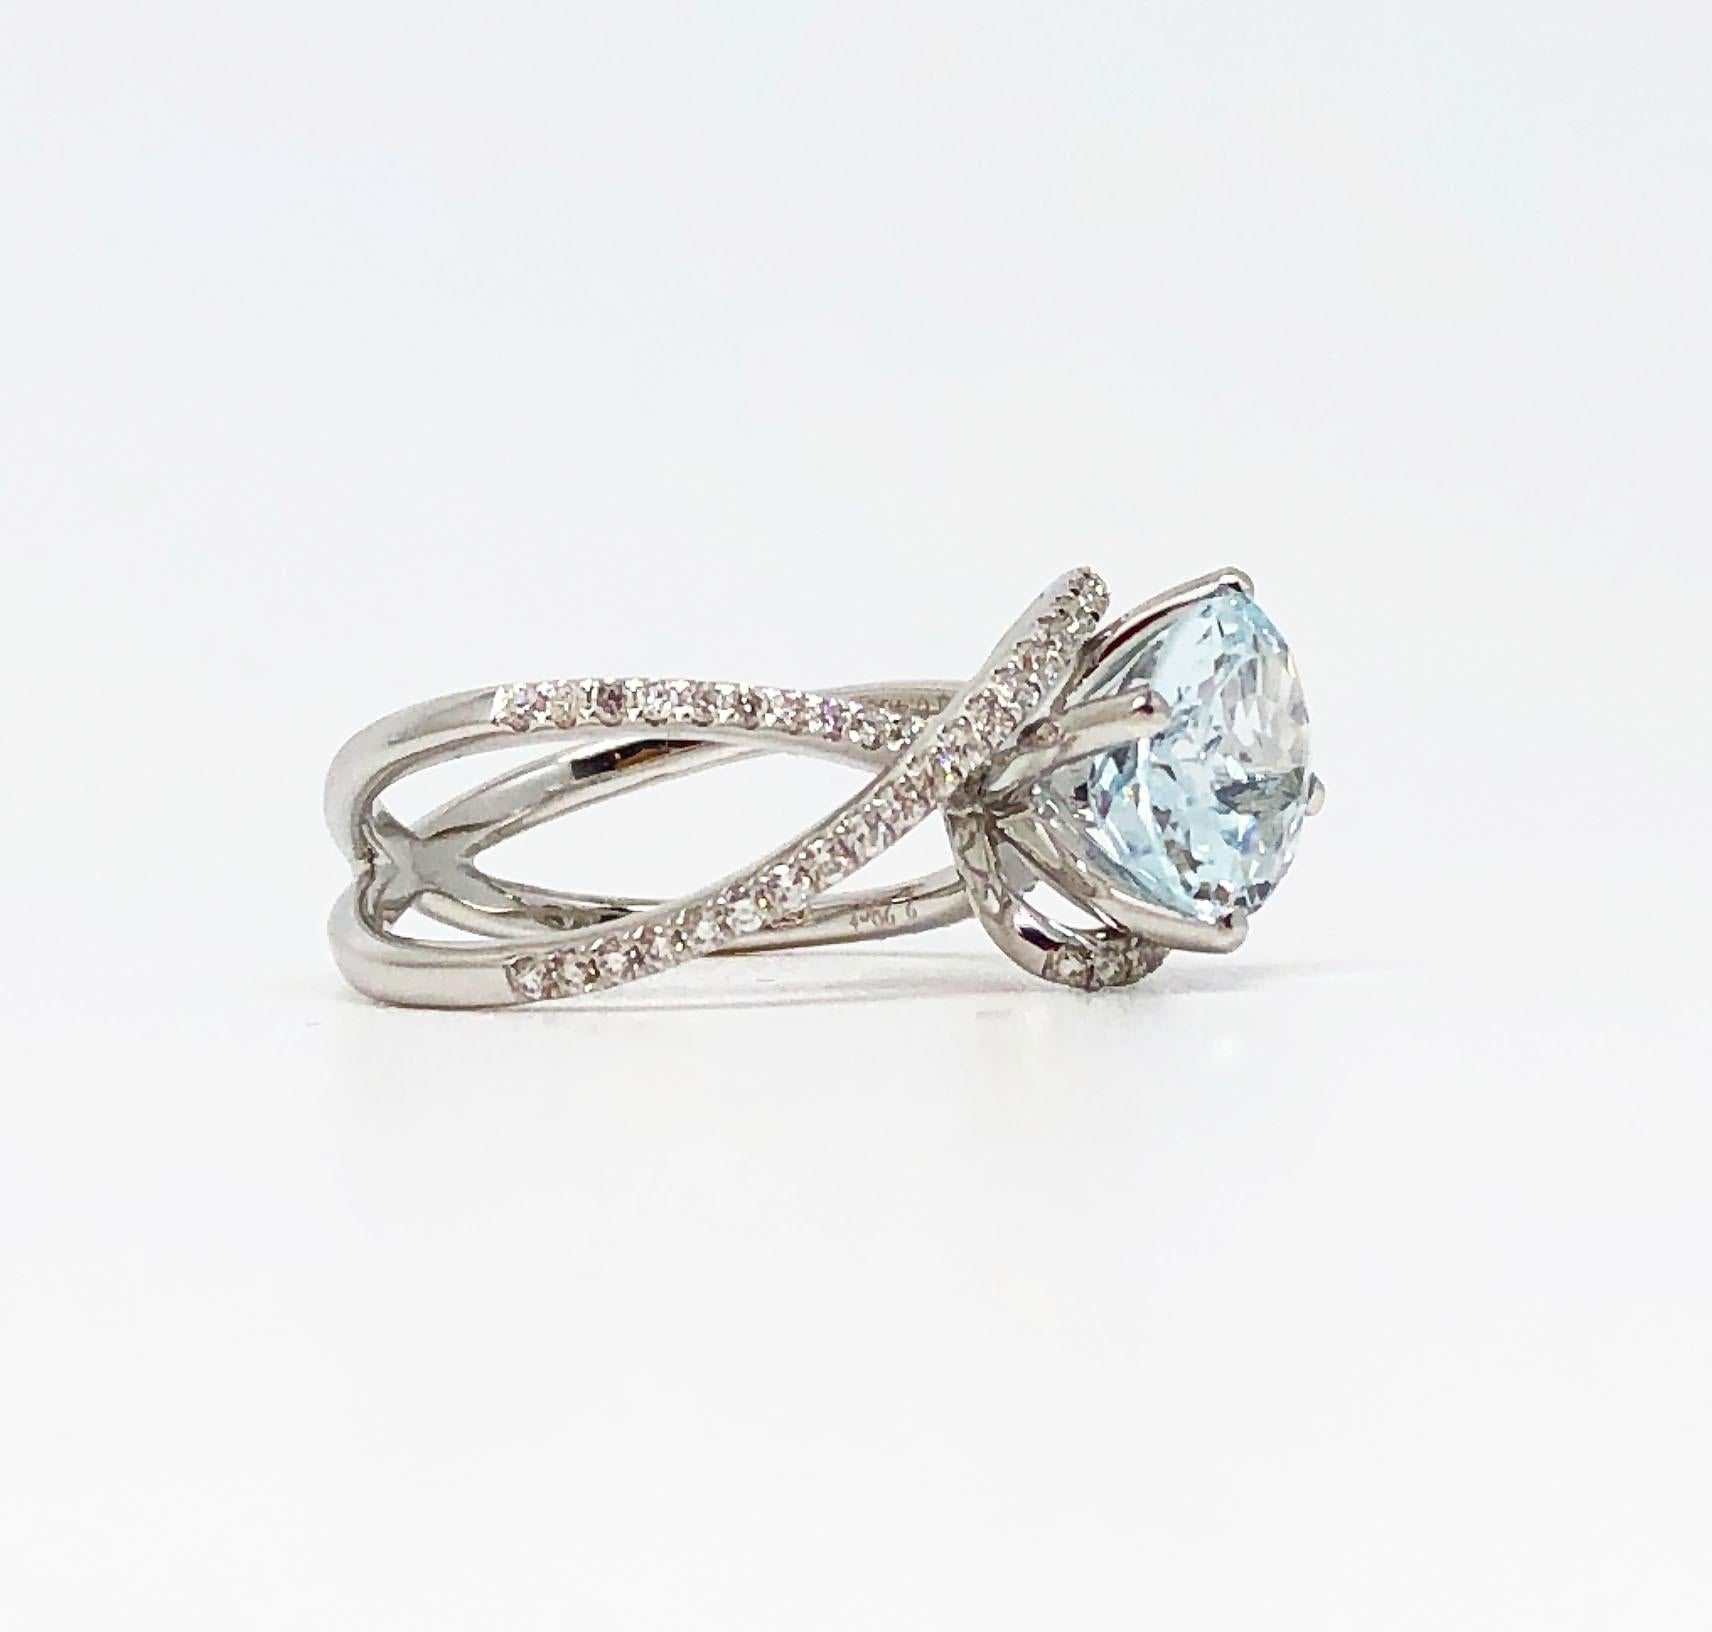 Let's show some love for GILIN's Summer Crush! Fill your jewellery box with our lovely Aqua collection, or surprise her with this stunning ring in this summer!

The centre Aquamarine weighs 2.29 Carat, with 0.40 Carat of diamonds beautifully set